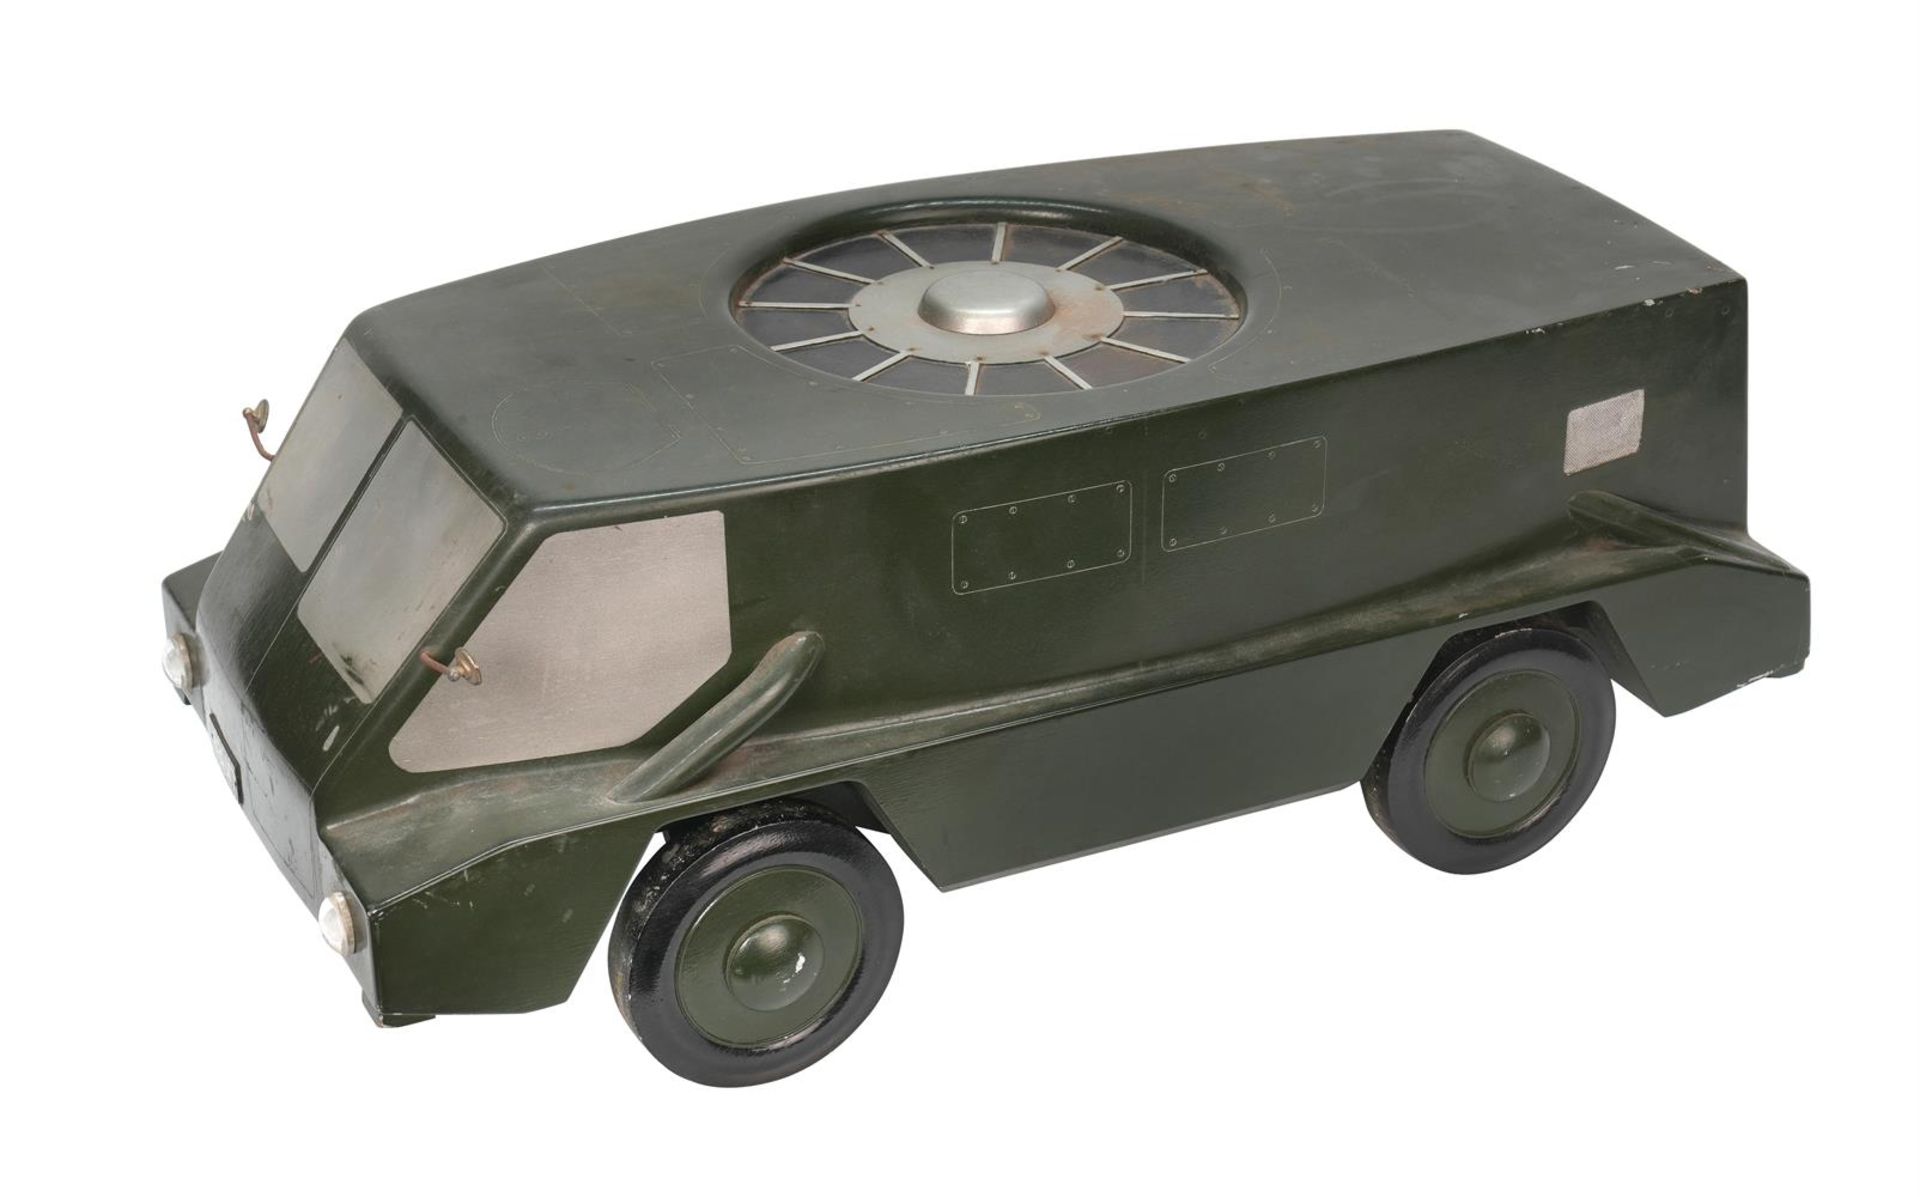 A SCRATCH BUILT PAINTED WOOD MODEL OF A PROTOTYPE 'HOVER VEHICLE OR TANK 3', 20TH CENTURY - Image 2 of 3